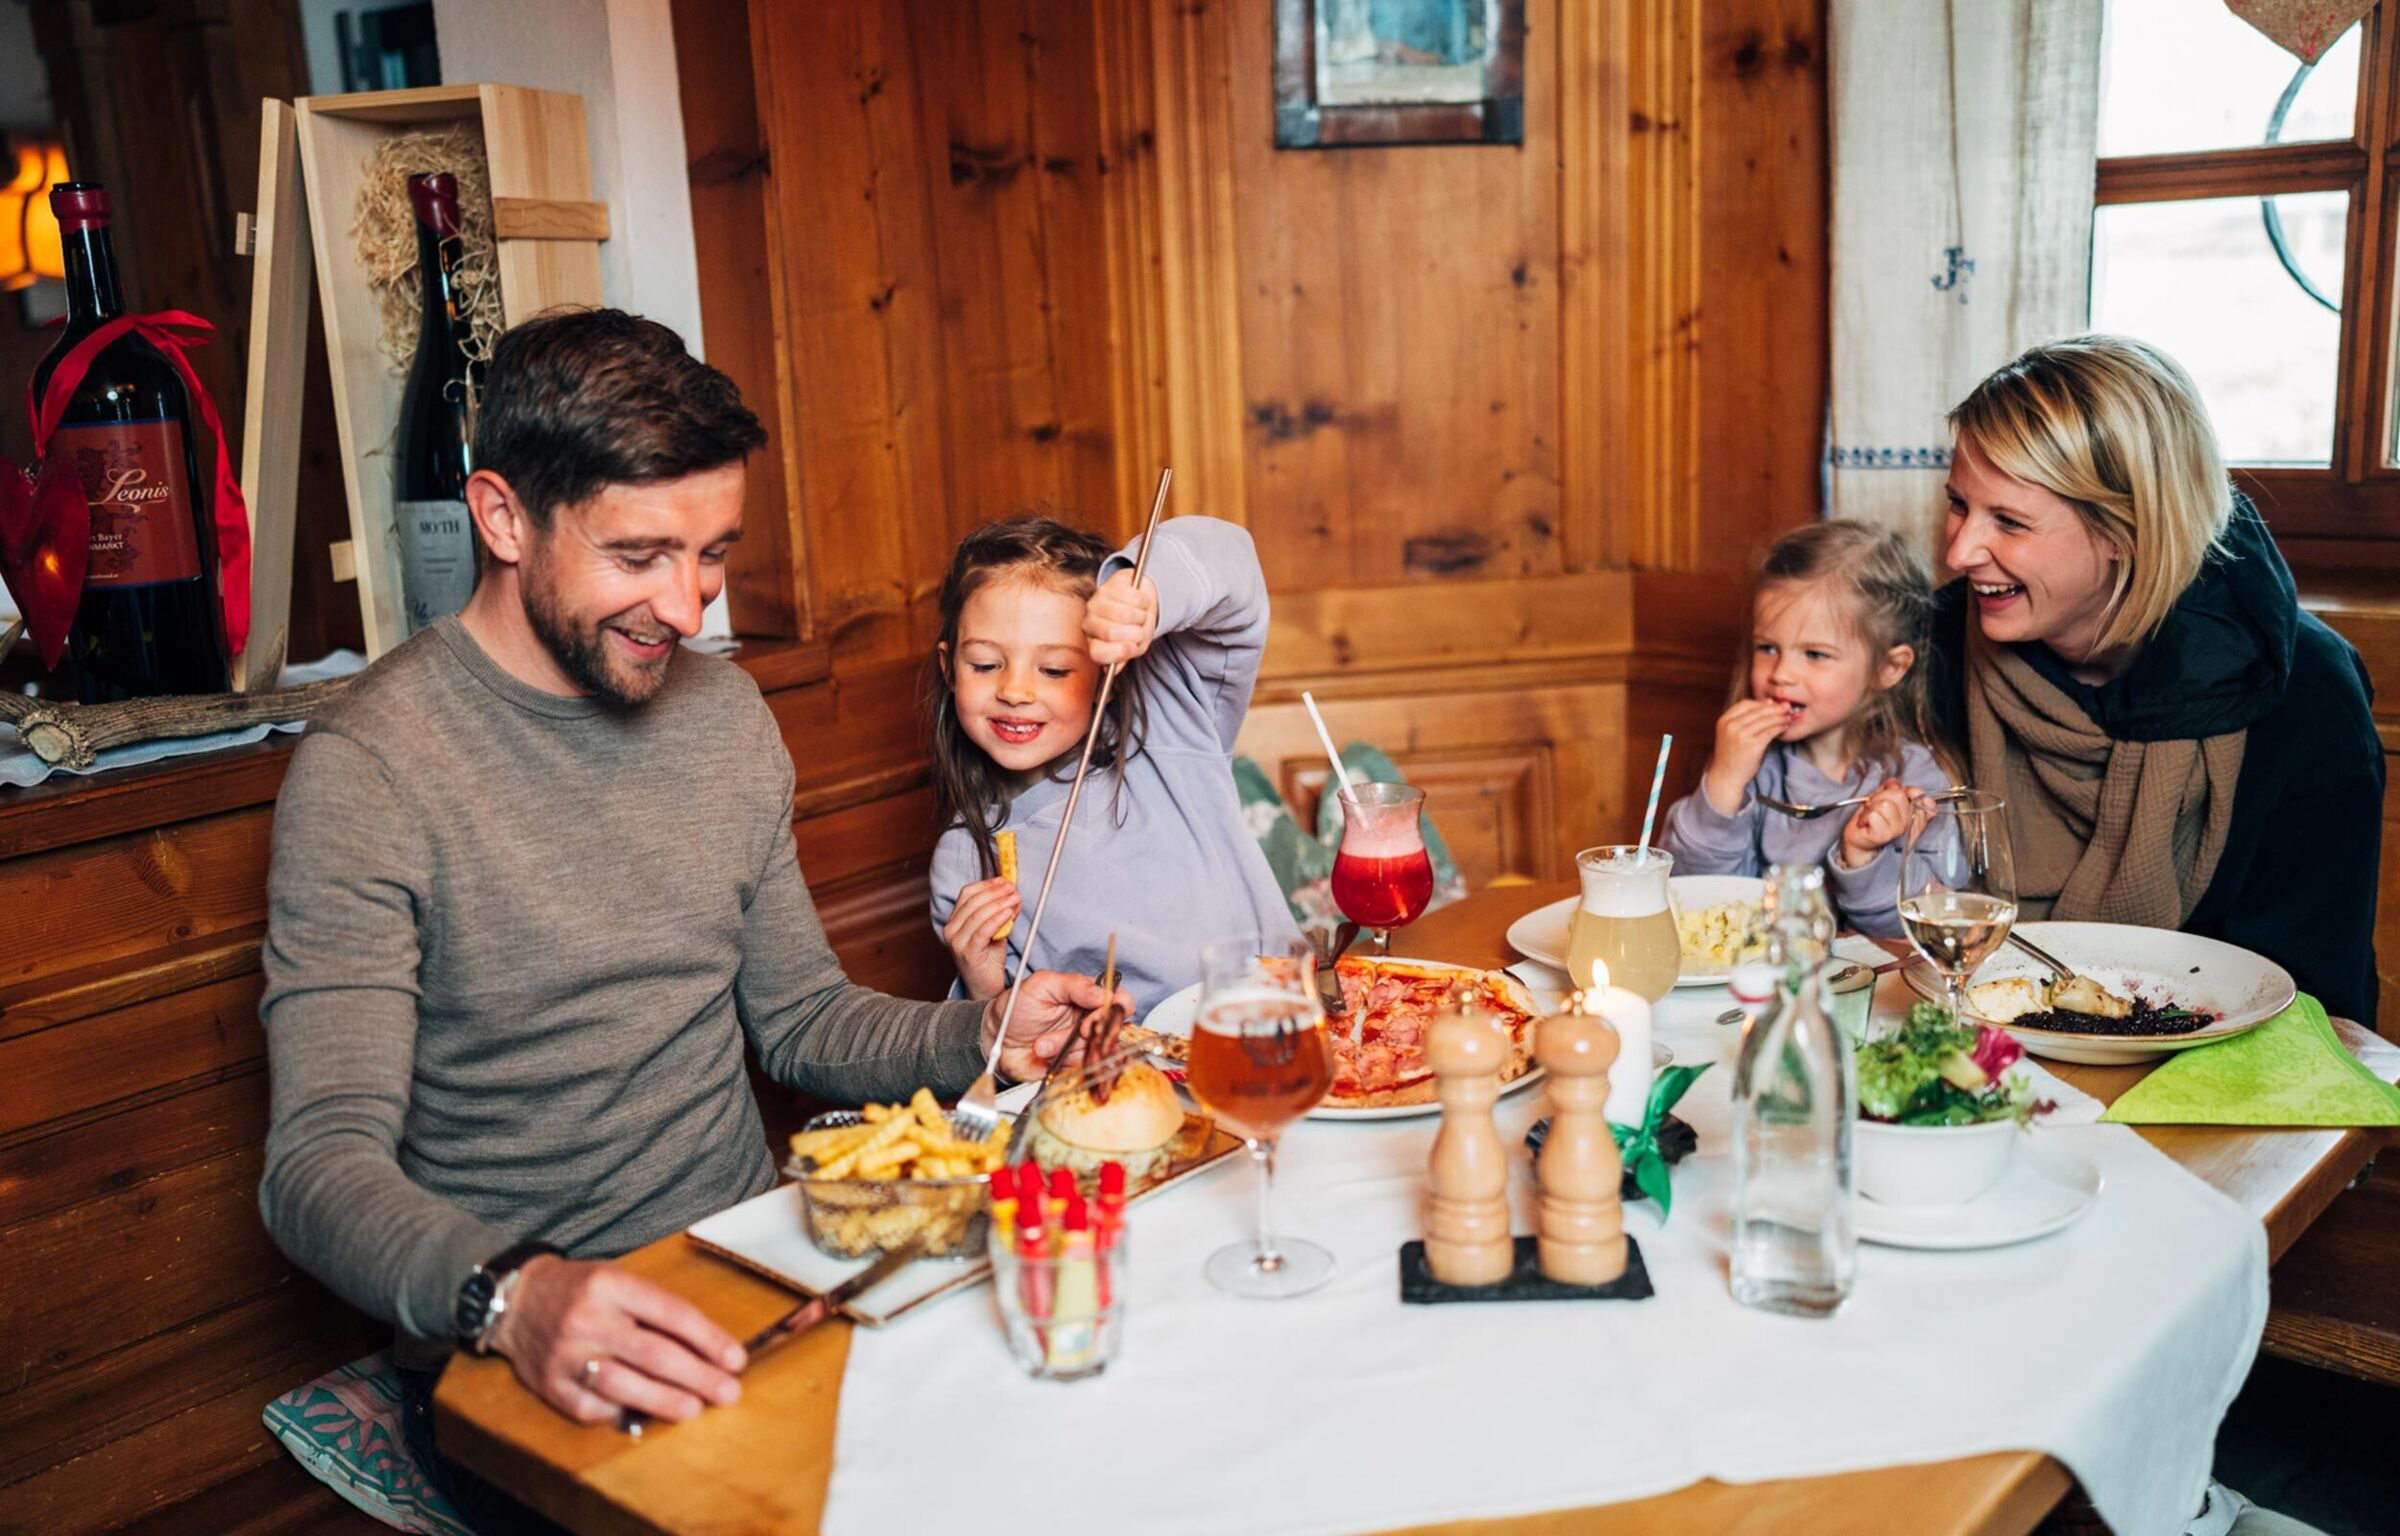 Family sitting in a rustic hut eating, a daughter steals a French fry from the father with a telescopic fork